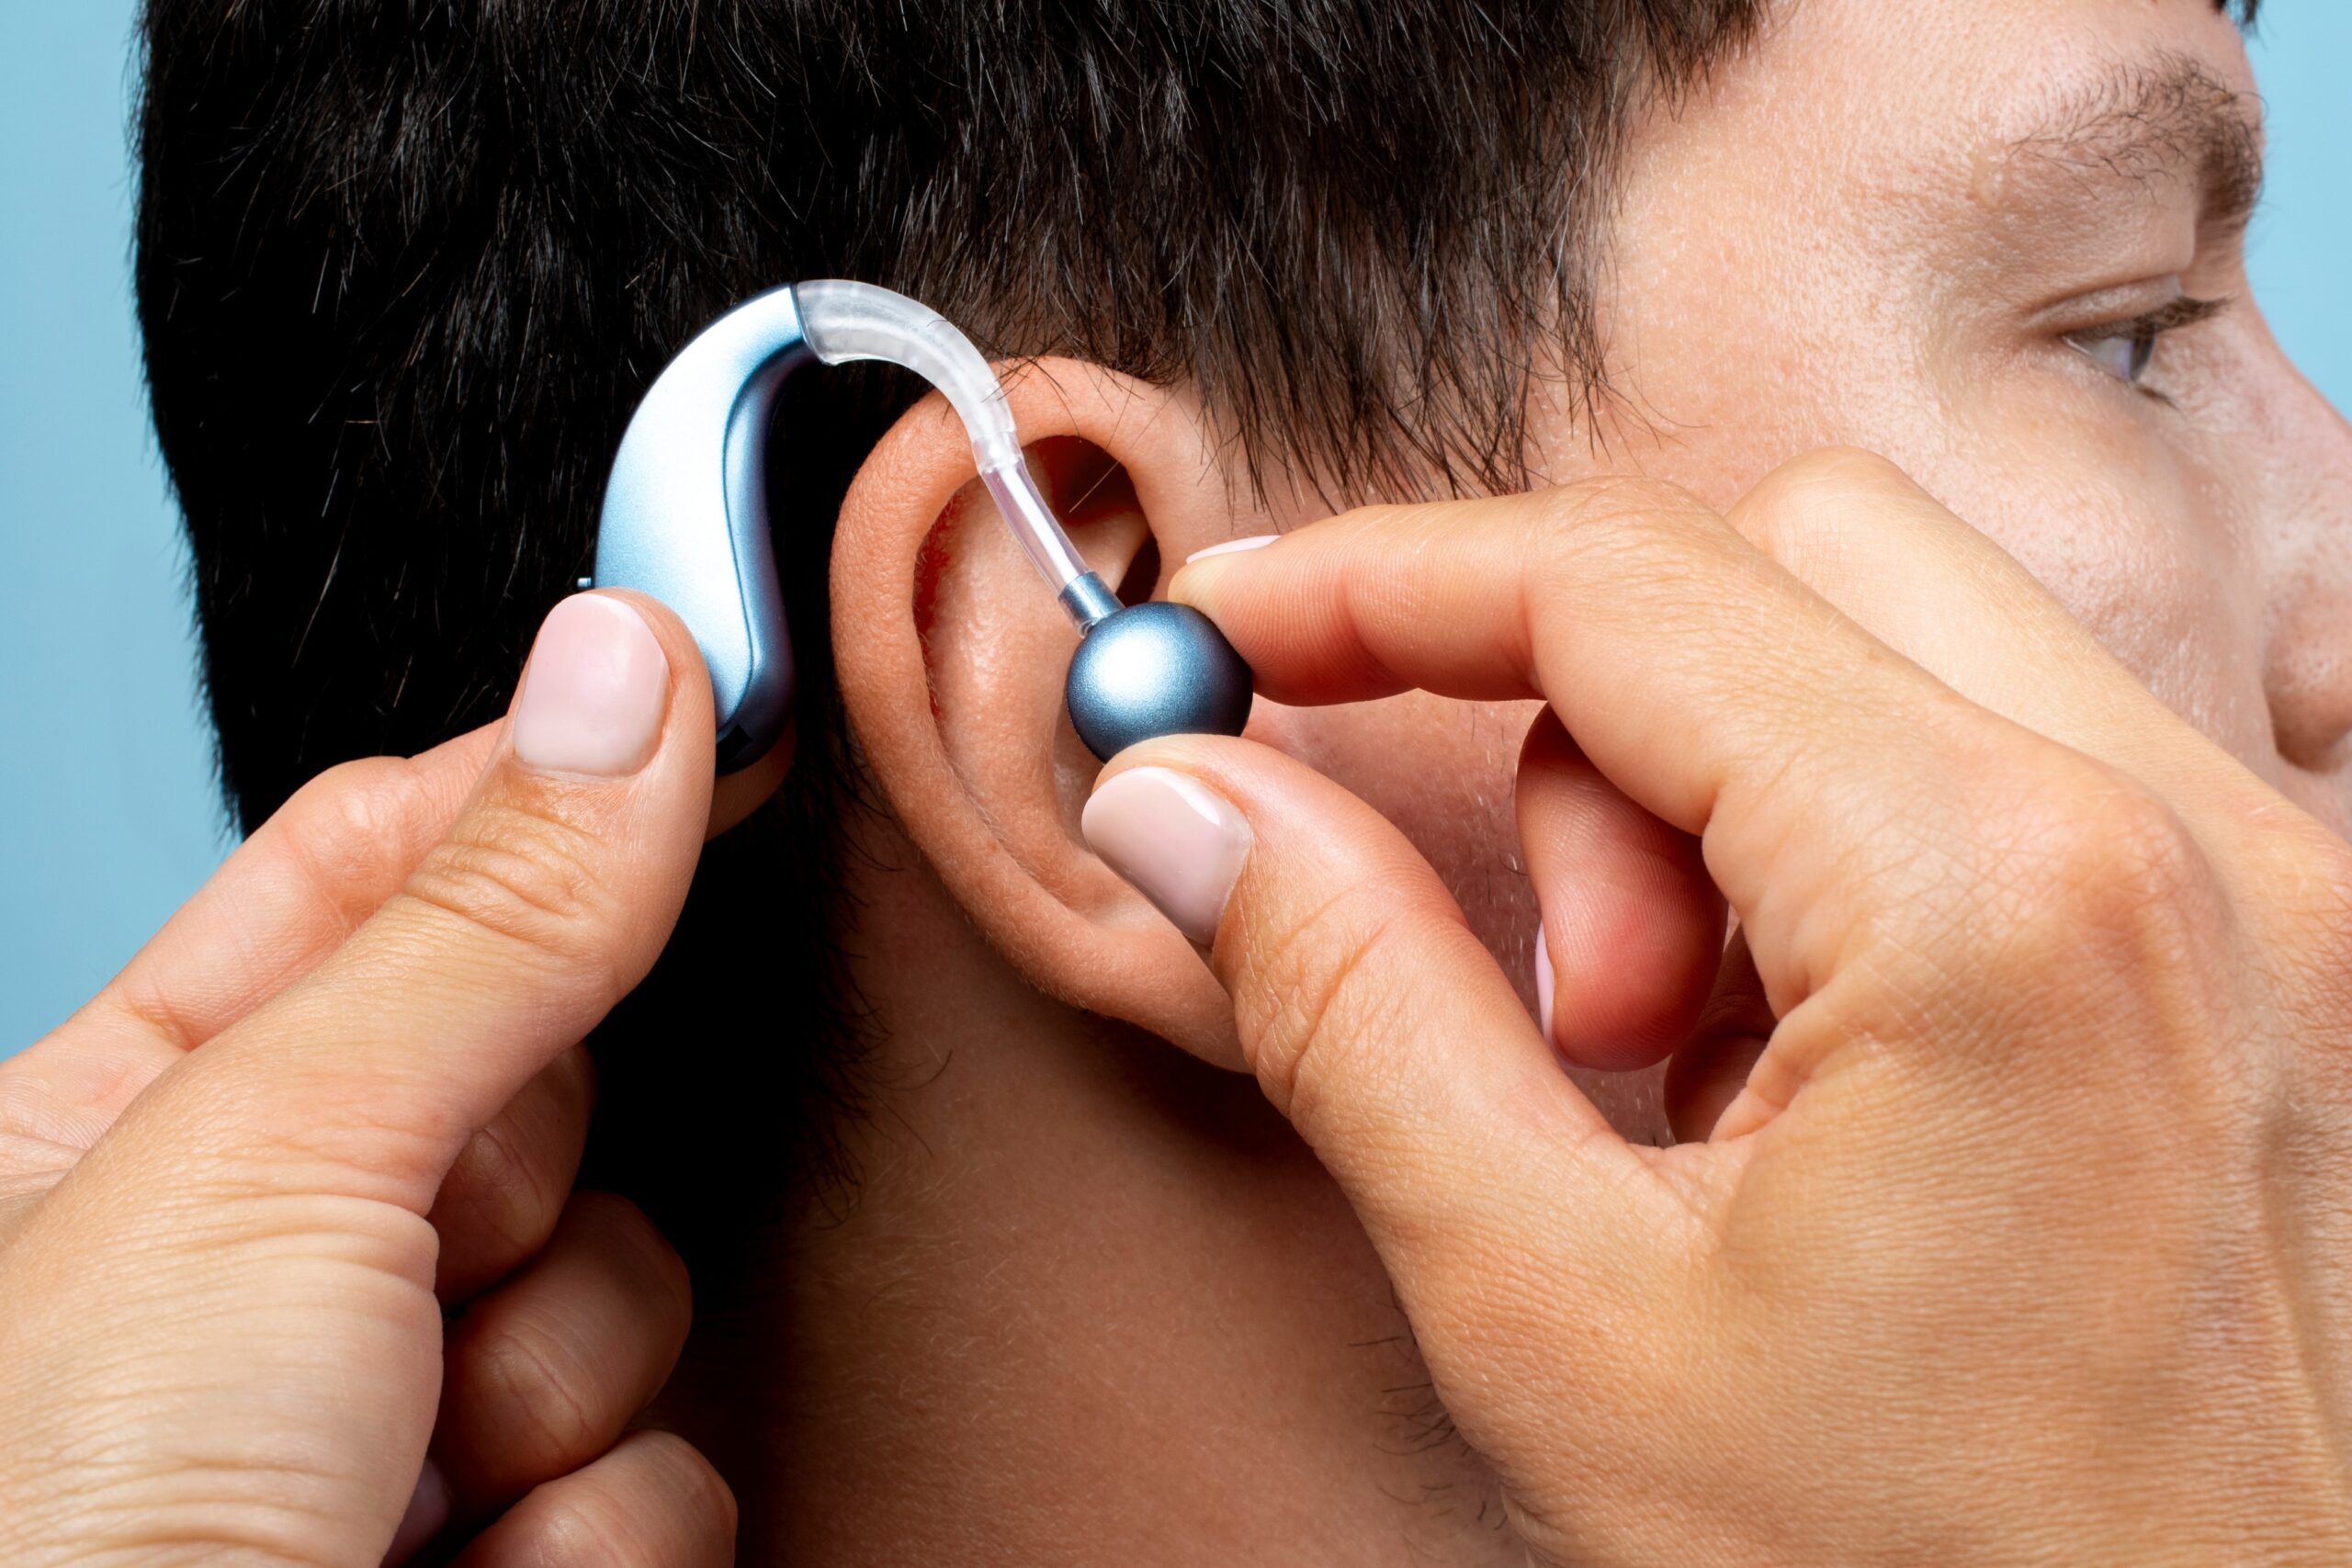 Hearing Aid Fitting: How to Find the Right Fit for Your Needs